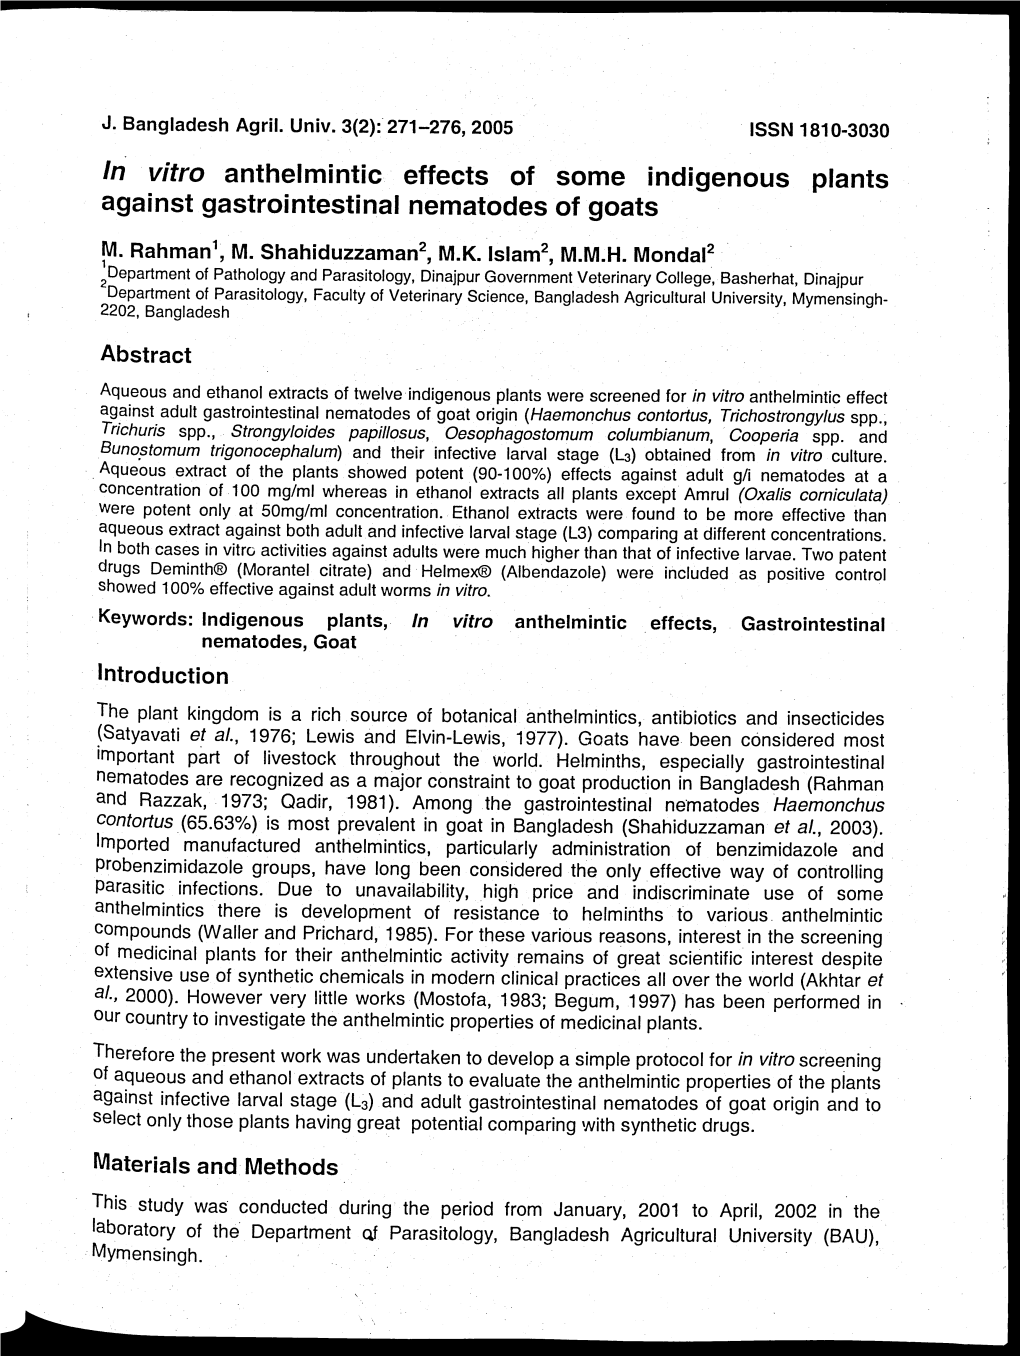 In Vitro Anthelmintic Effects of Some Indigenous Plants Against Gastrointestinal Nematodes of Goats